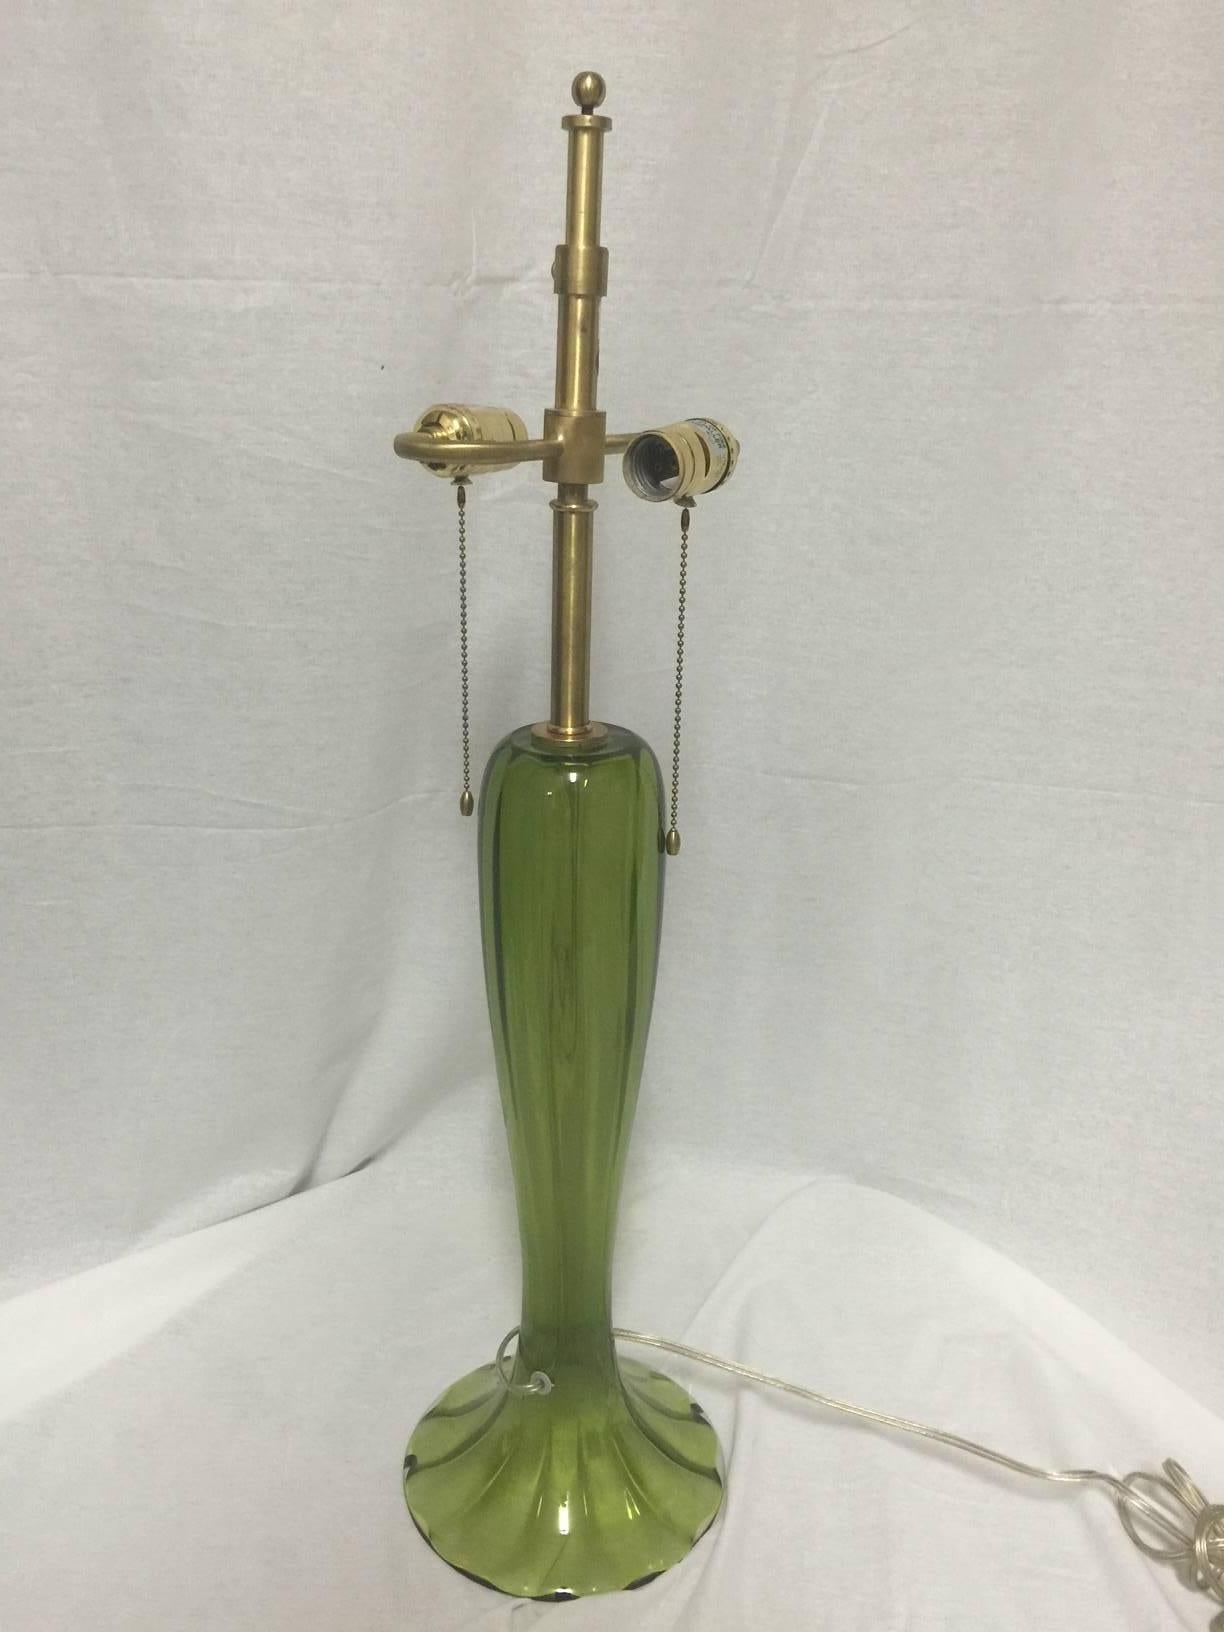 A simply gorgeous pair of Murano art glass trumpet lamps in a vibrant candy apple green. The lamps are quite tall, slender and ribbed lamp with a splayed foot. Shades are not included.